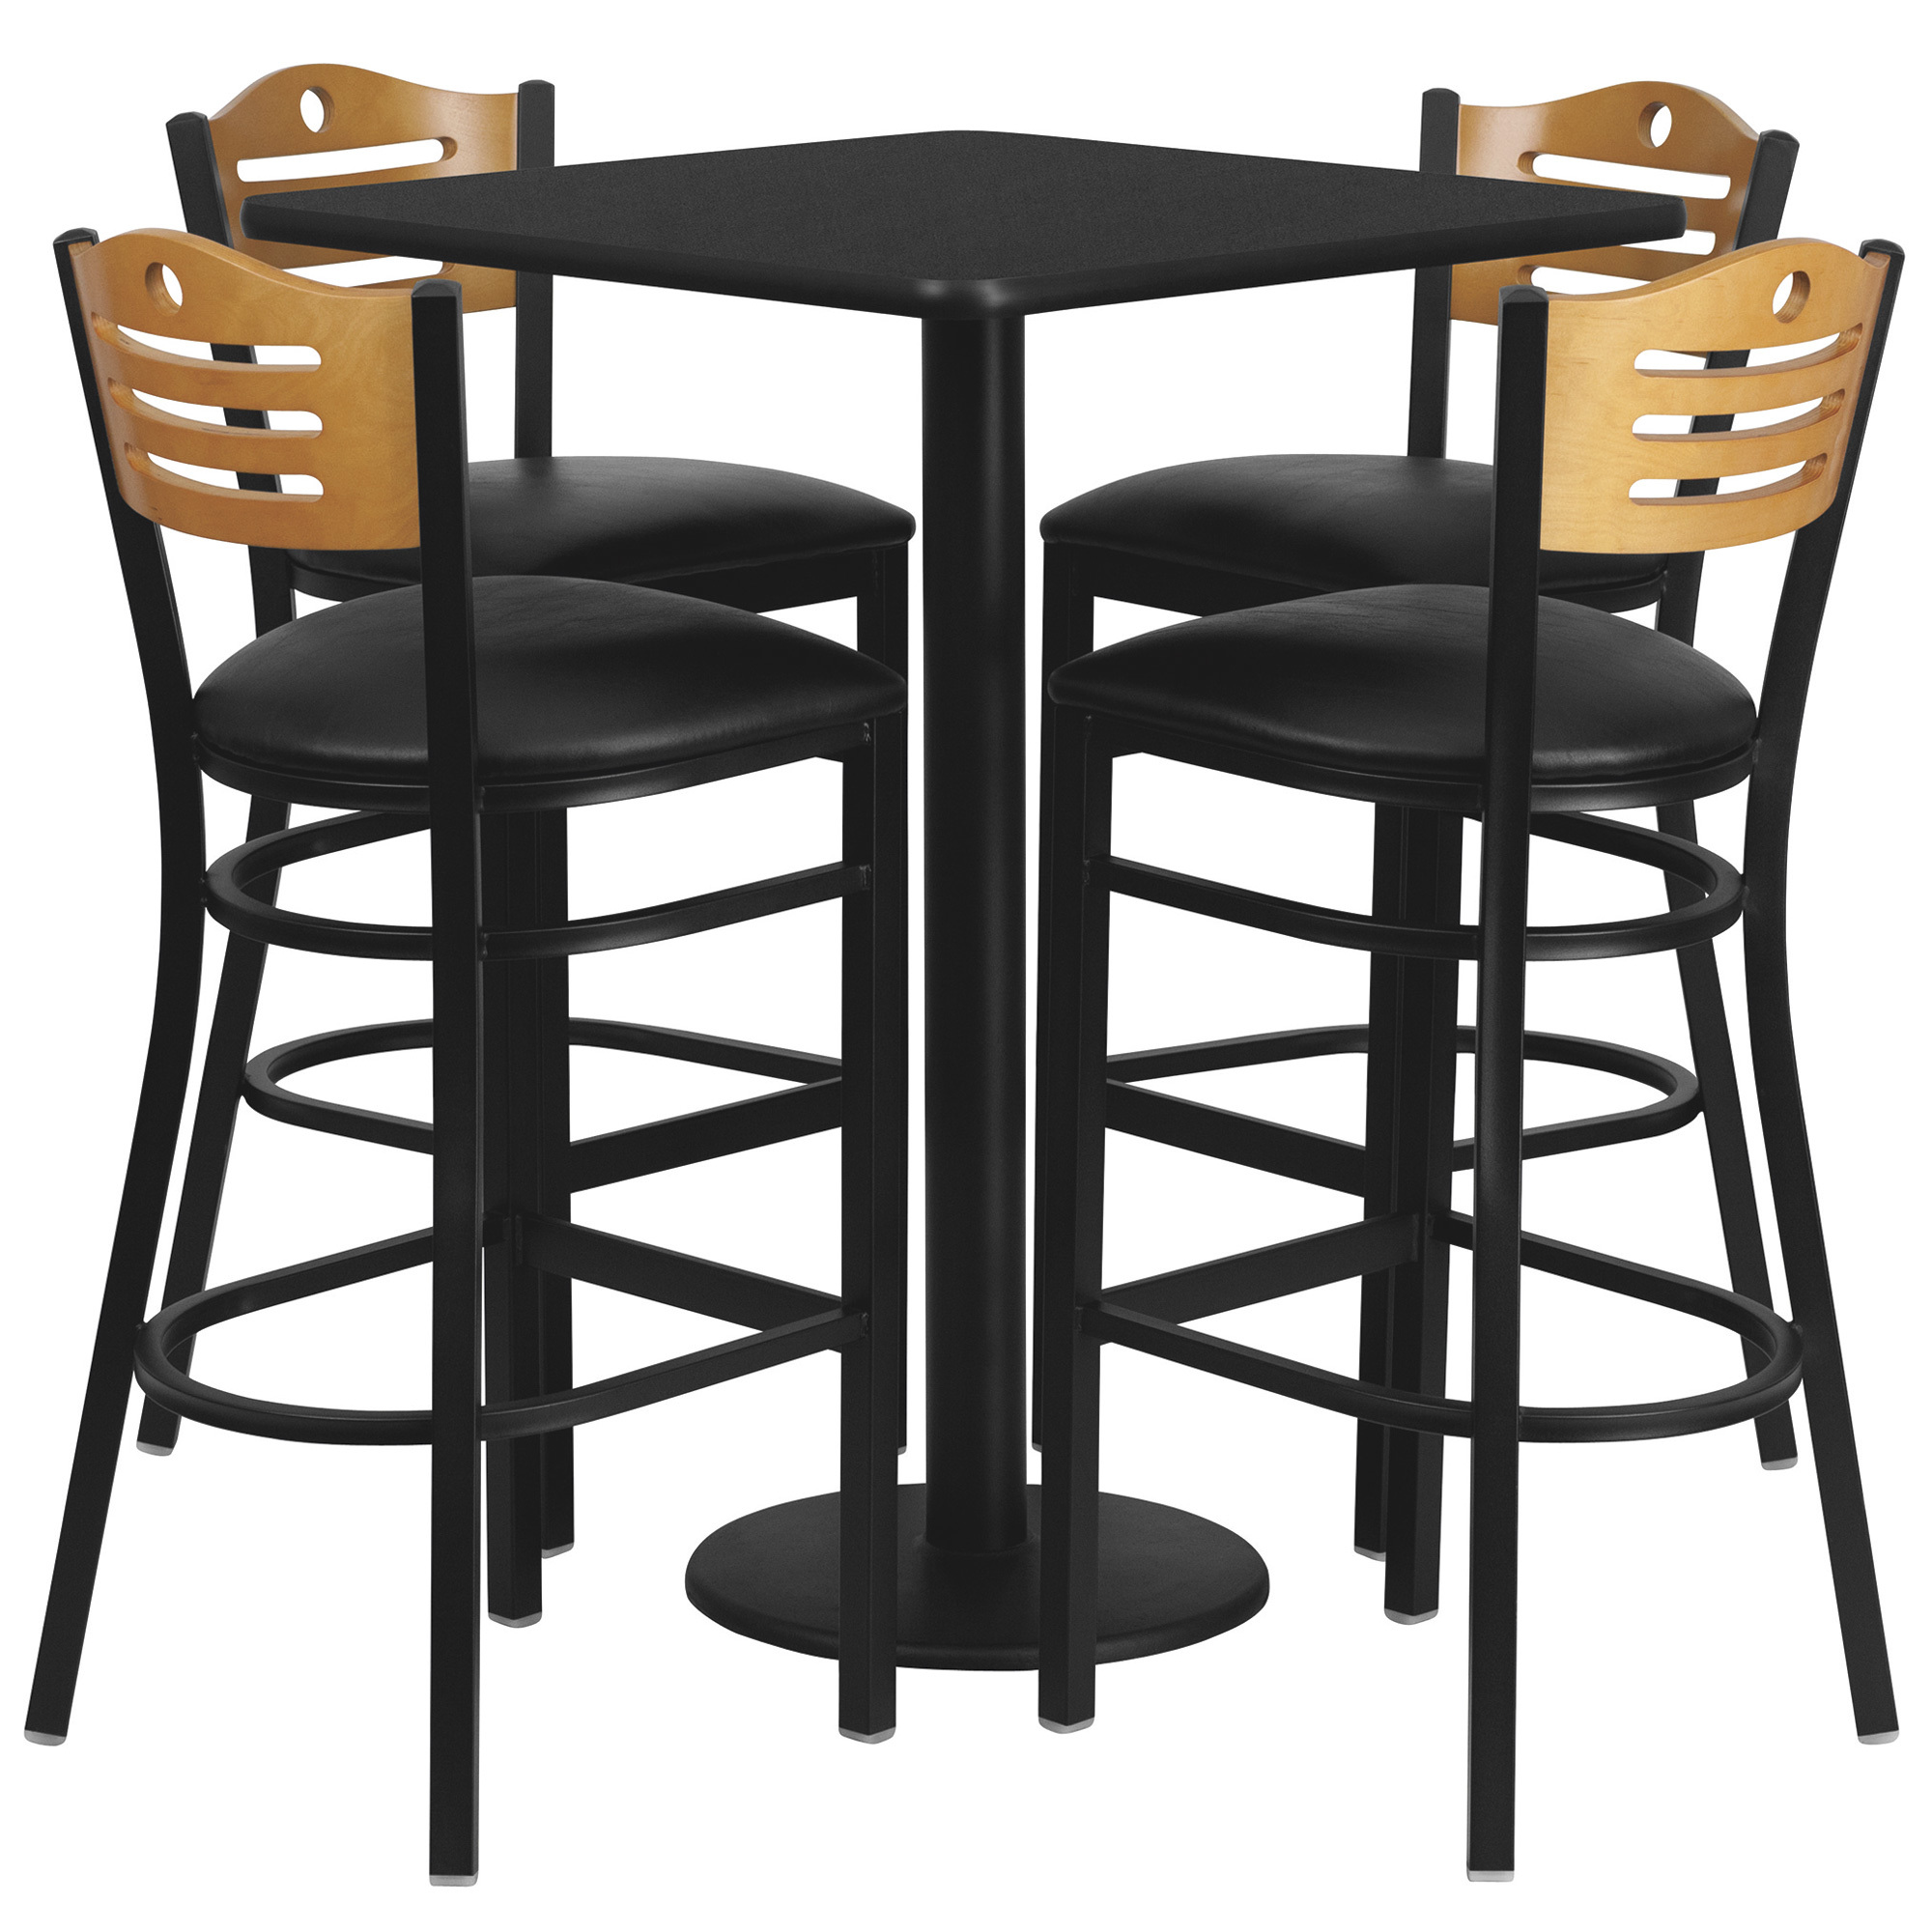 30Inch Square Bar-Height Table and 4-Piece Stool Set — Black Tabletop/Black Vinyl Seat, Model - Flash Furniture MD0019